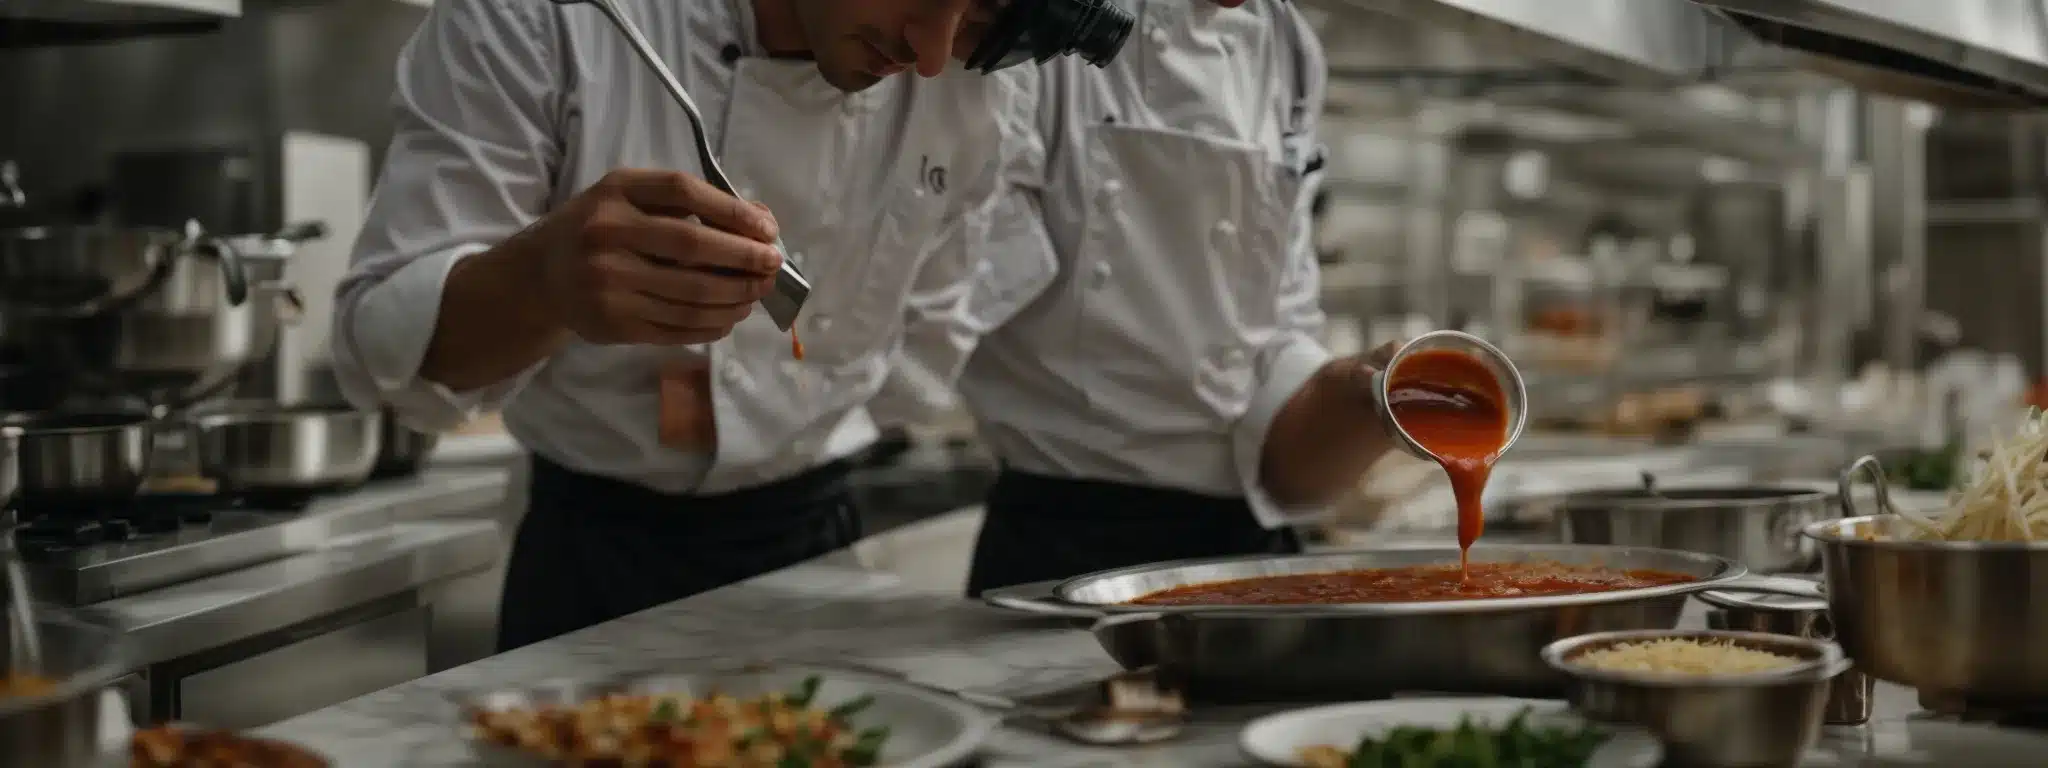 A Chef Drizzles A Finishing Sauce Onto A Gourmet Dish In A High-End Restaurant Kitchen.